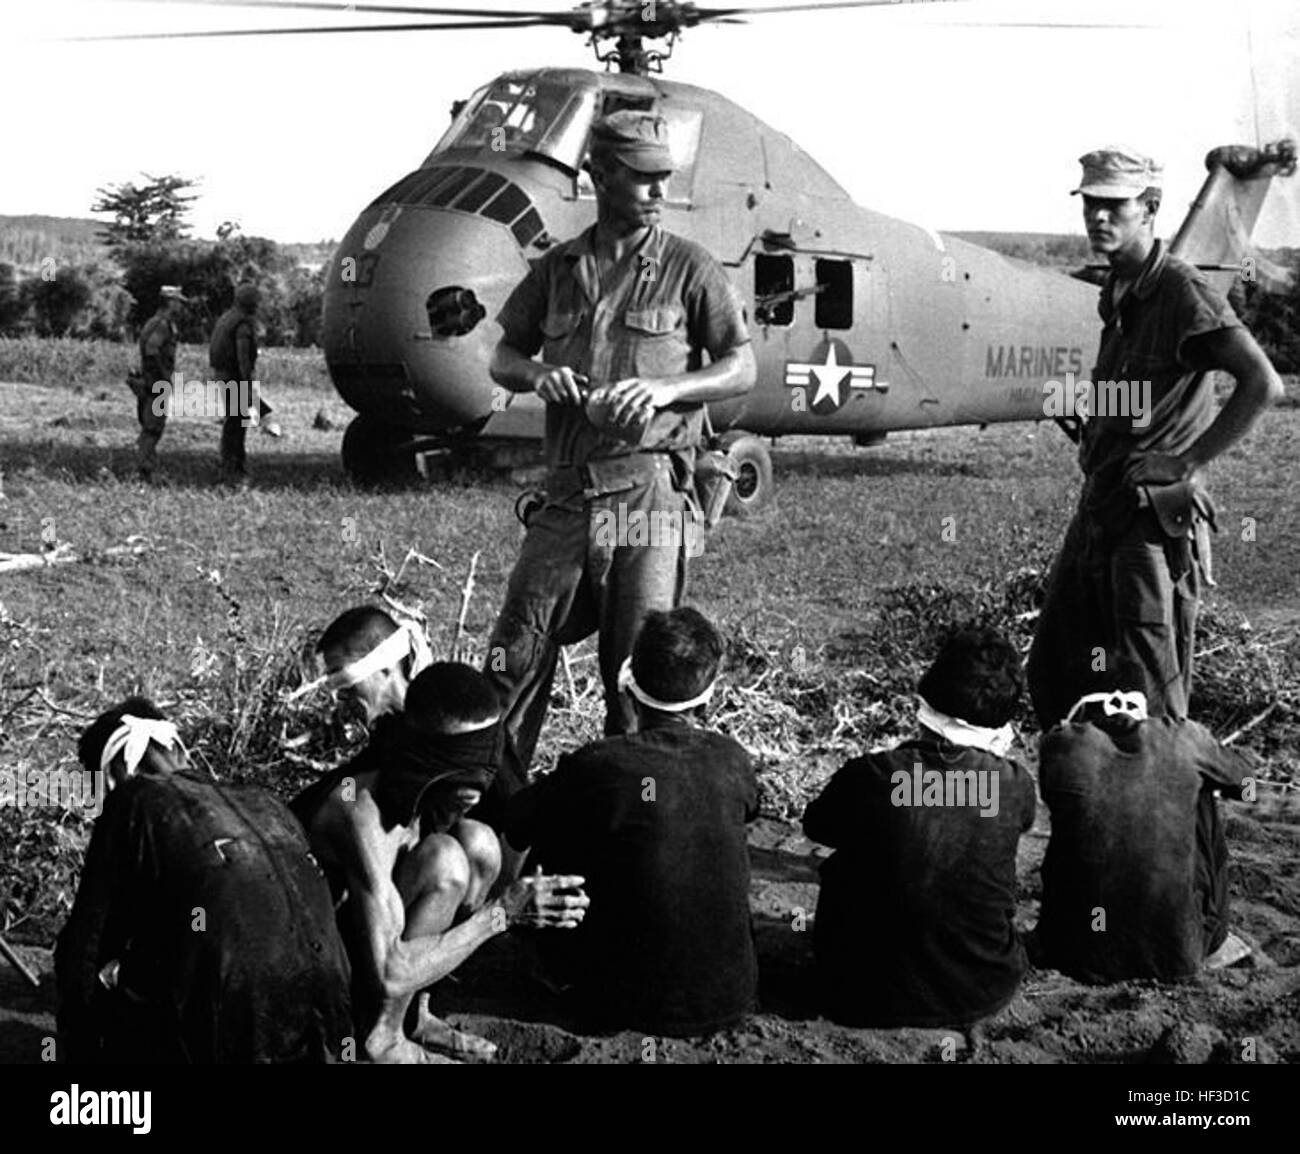 Van Tuong, Vietnam (Aug. 1965) - Vietcong prisoners await being carried by helicopter to rear area after Operation Starlite. (U.S. Marine Corps photo) Operation Starlite, Plus one for the Corps 130814-M-NI439-988 Stock Photo